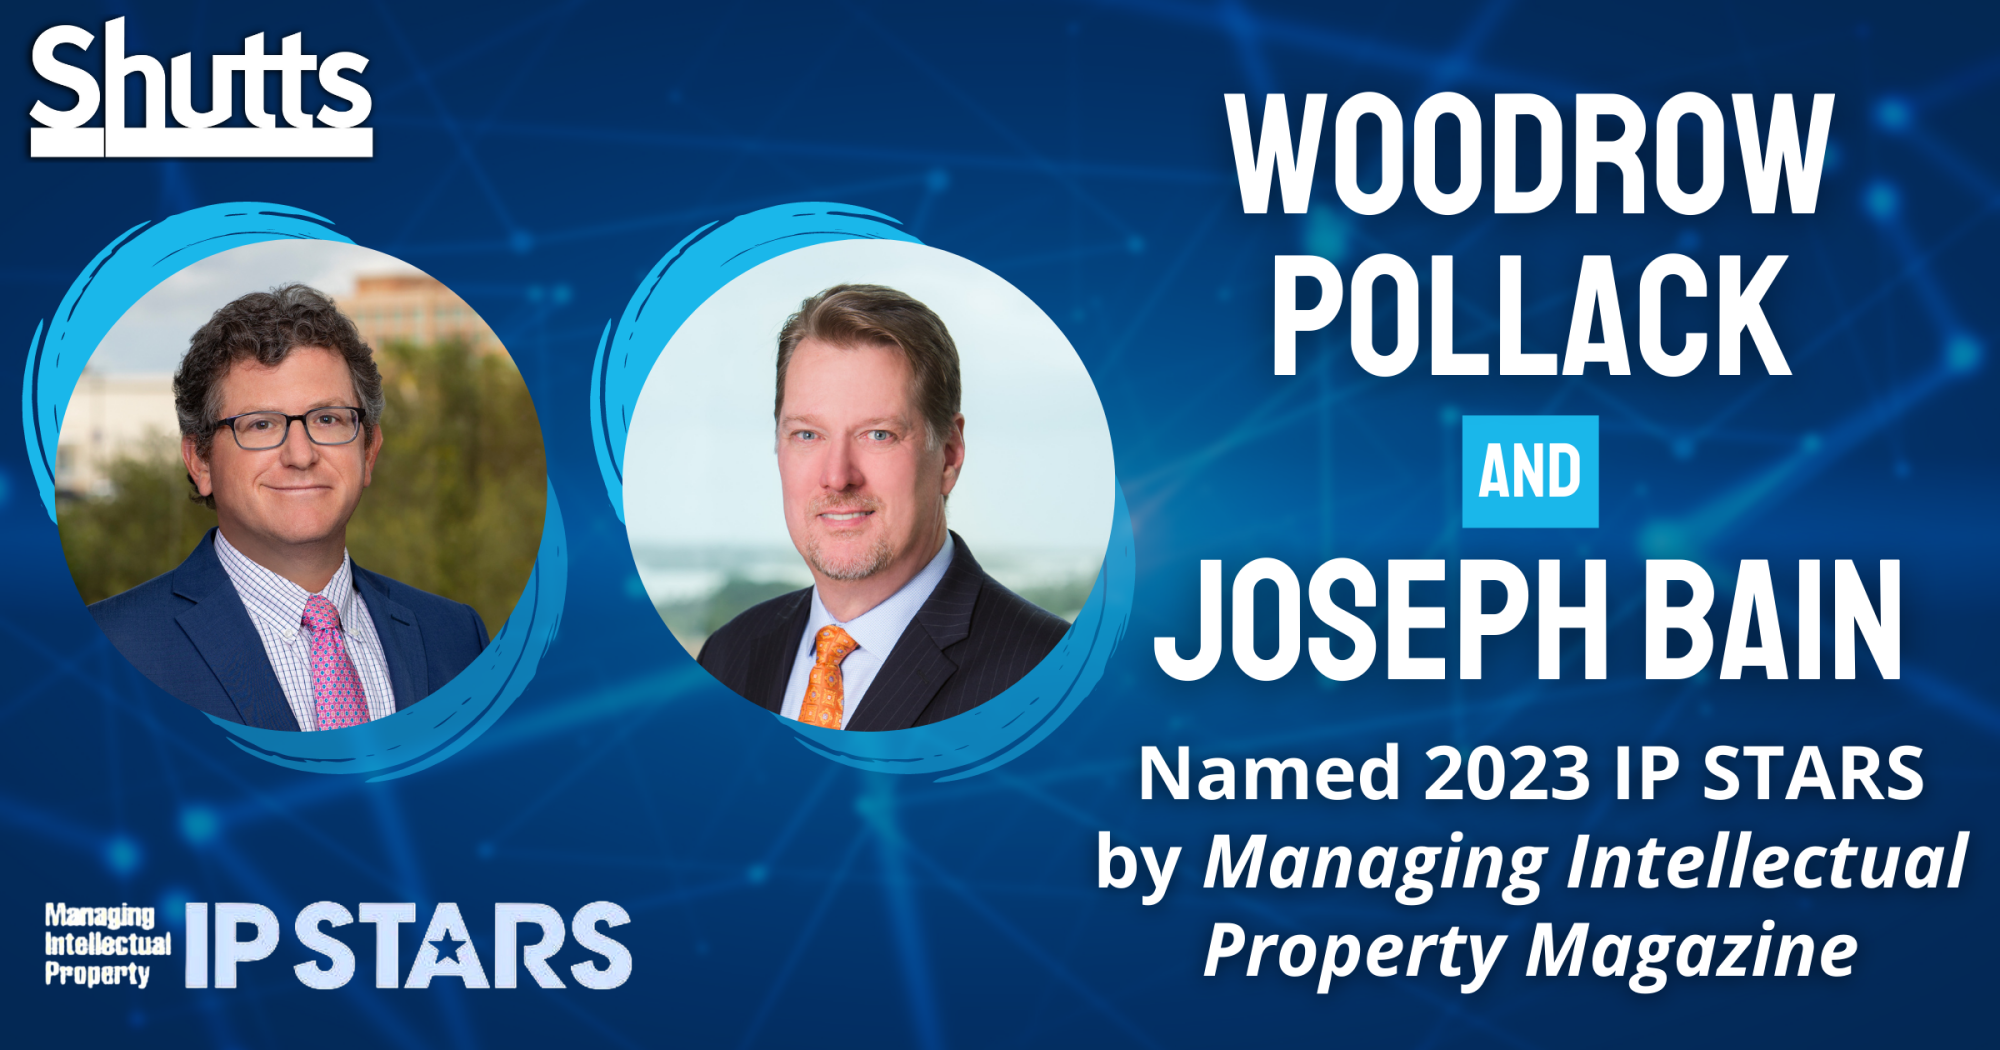 Woodrow Pollack and Joseph Bain Named 2023 IP STARS by Managing Intellectual Property Magazine